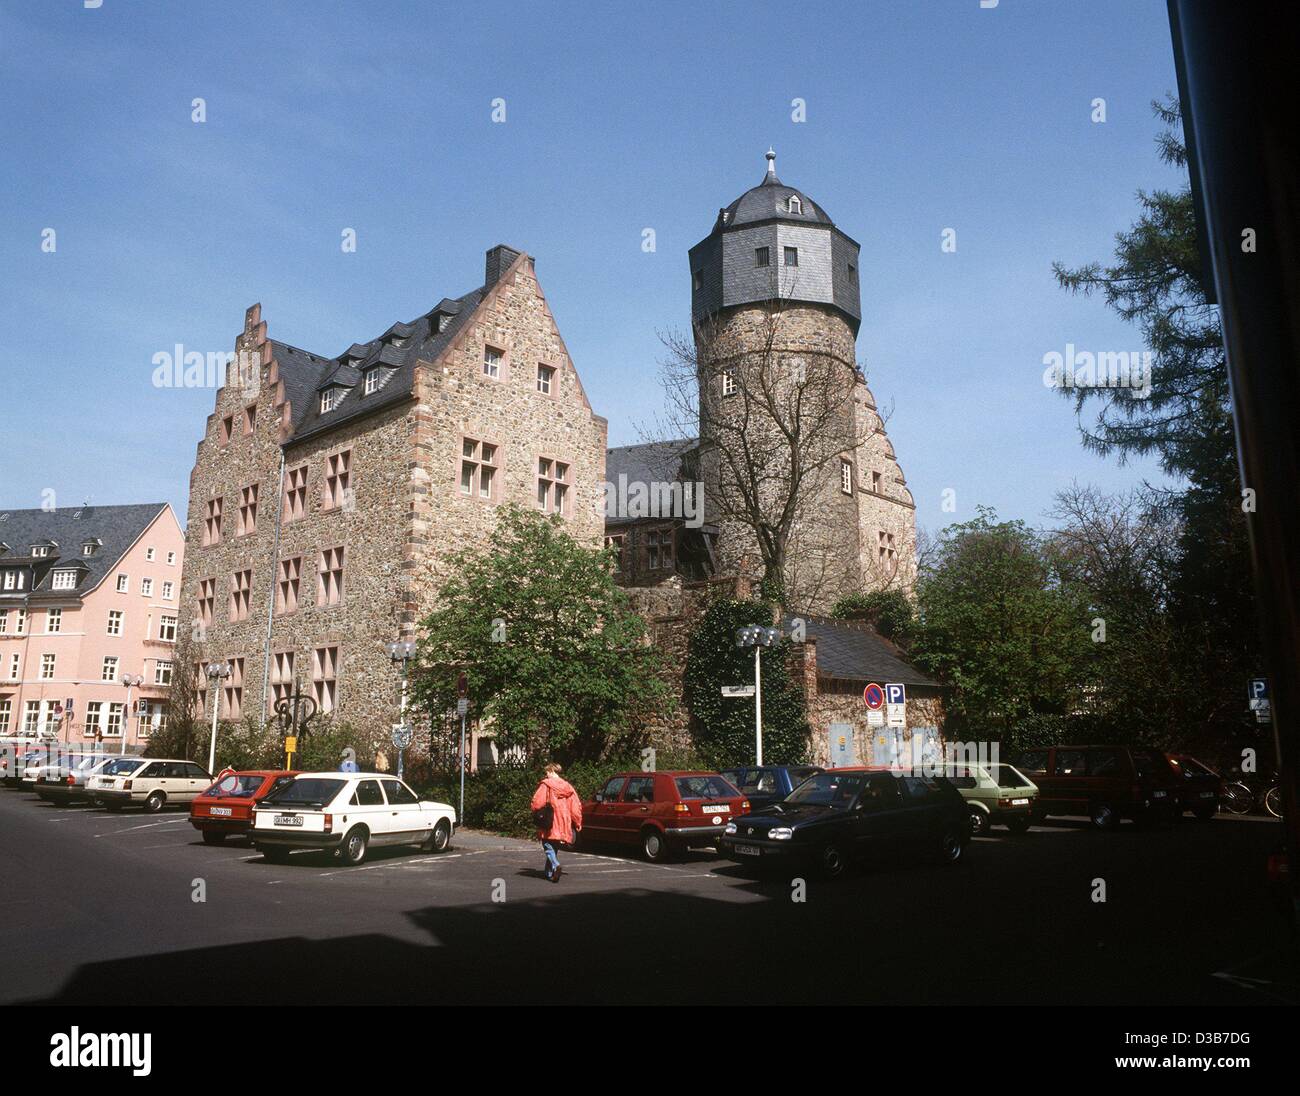 (dpa files) - The old castle in Gießen was built in the 14th century, restructured, destroyed and rebuilt over the following four centuries (picture of 1993). Stock Photo